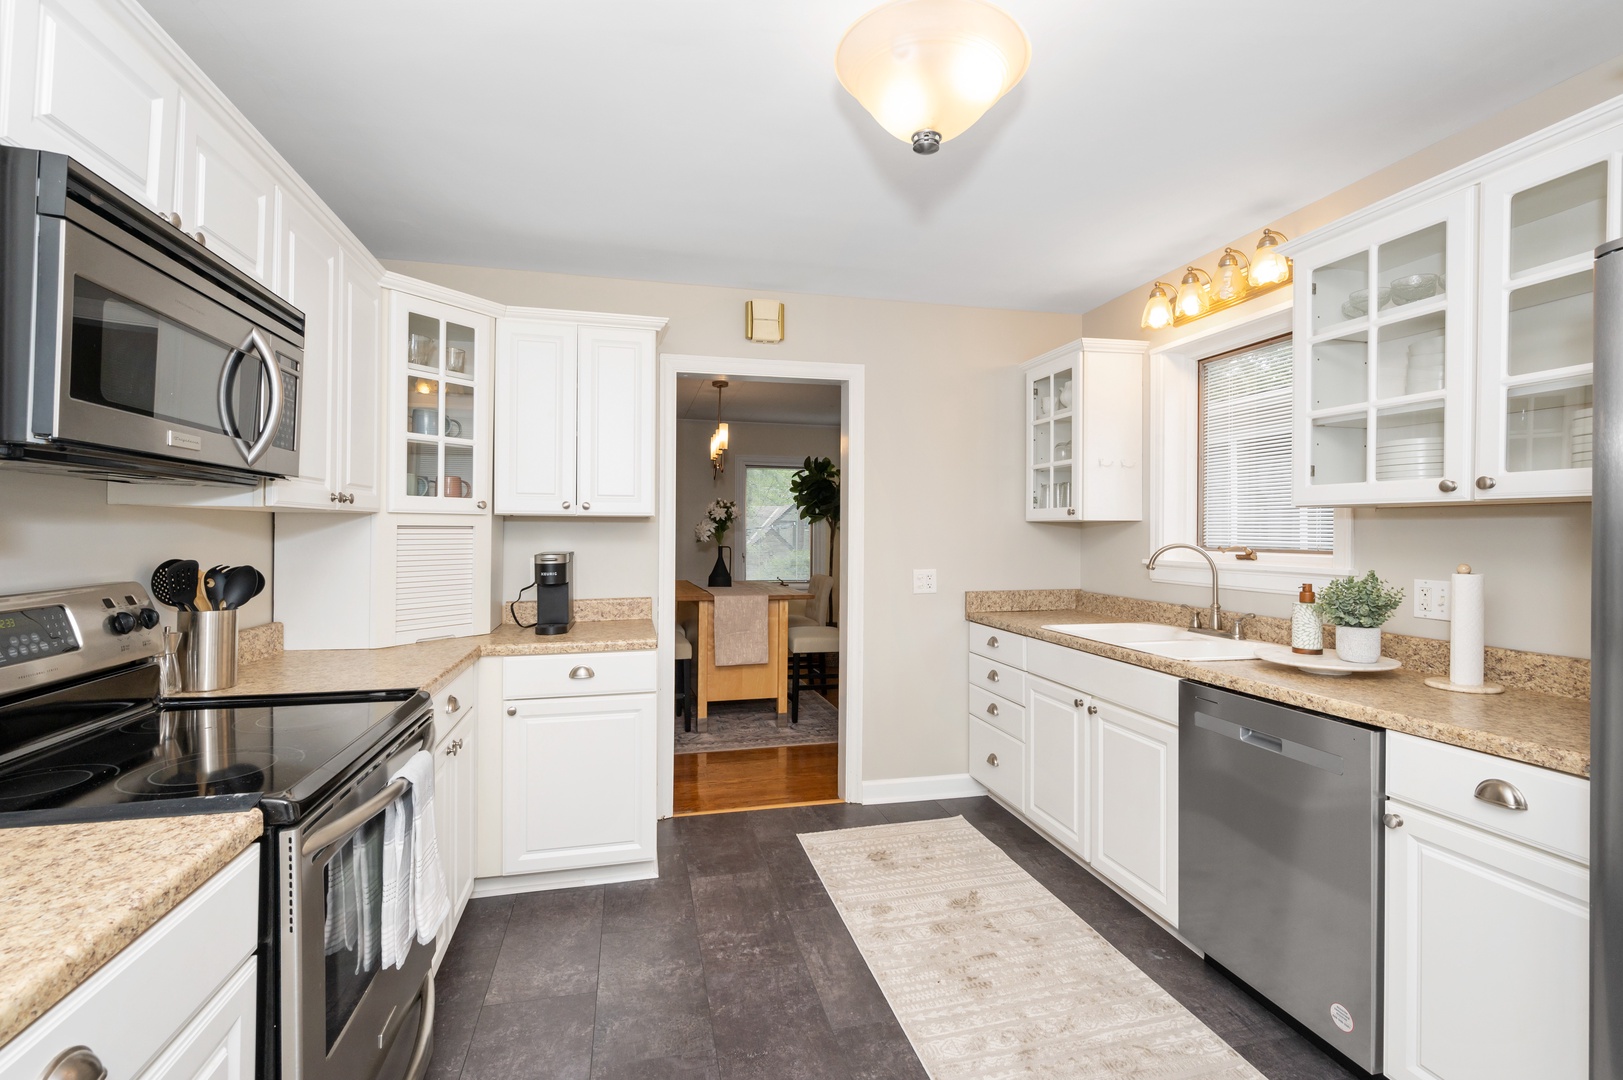 The updated kitchen is spacious & offers all the comforts of home